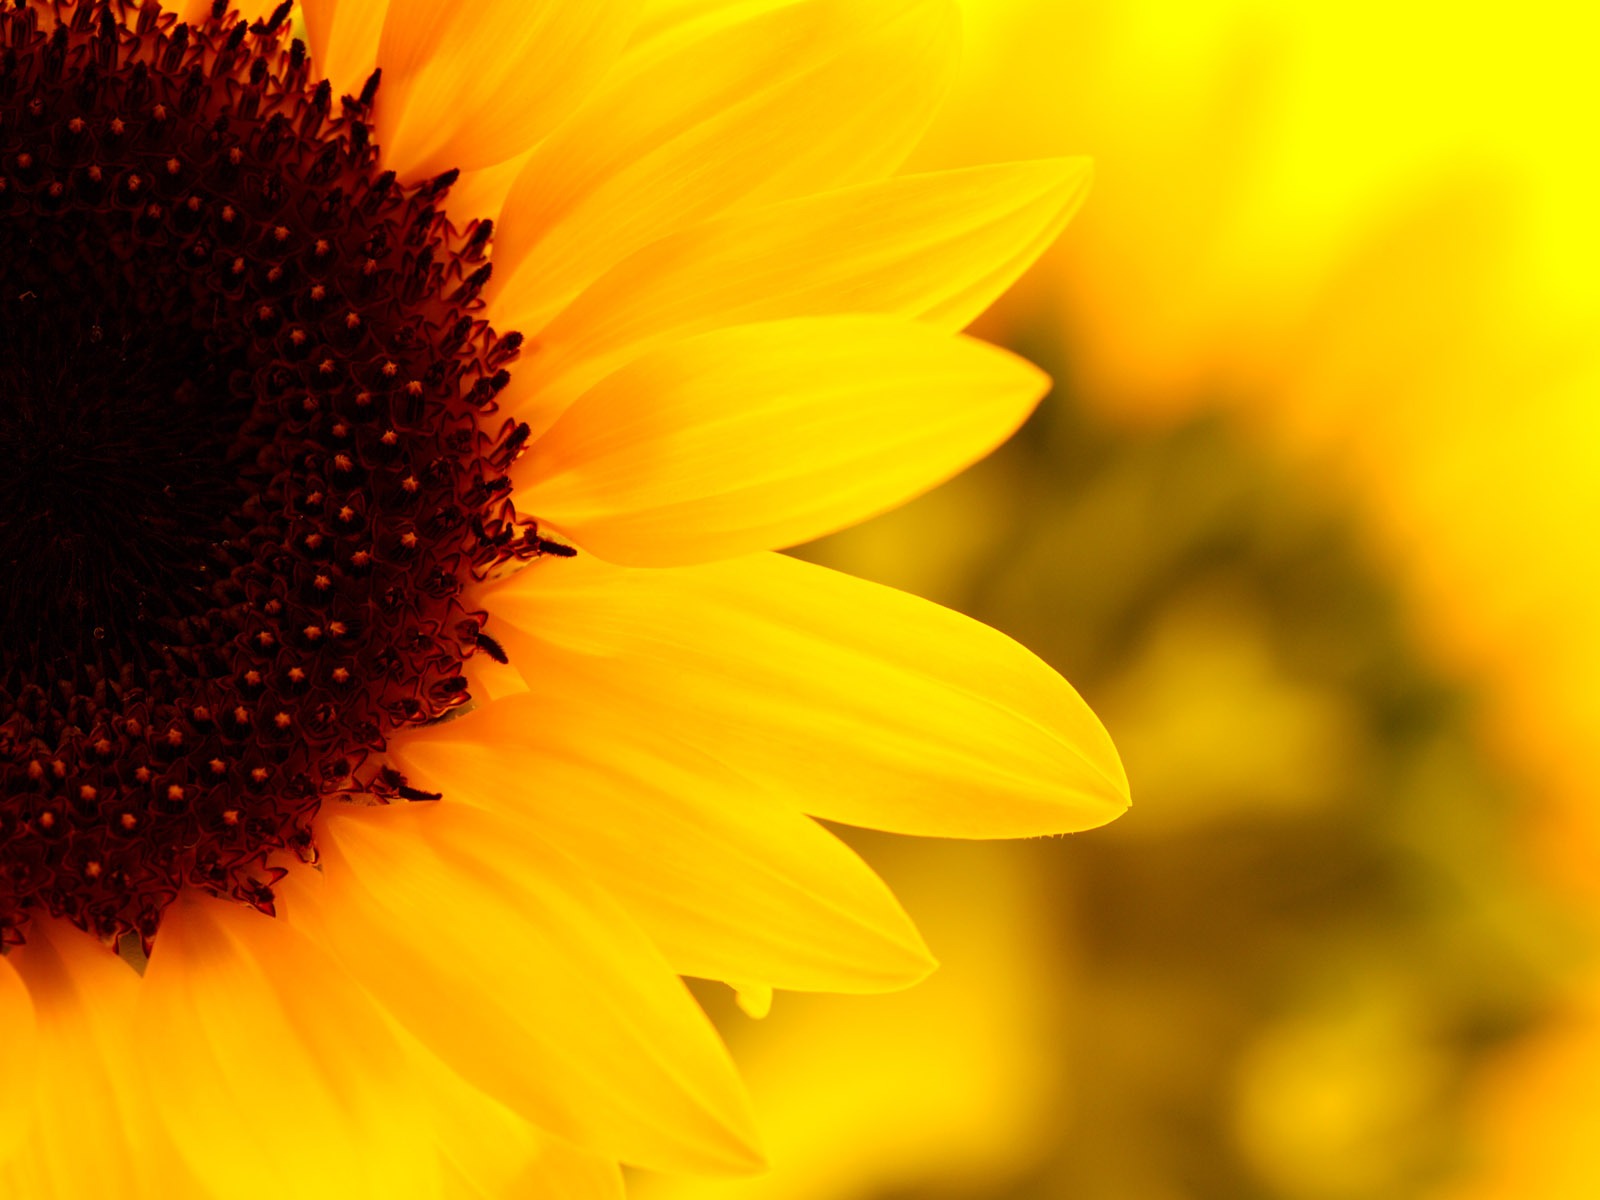 Sunny sunflower photo HD Wallpapers #10 - 1600x1200